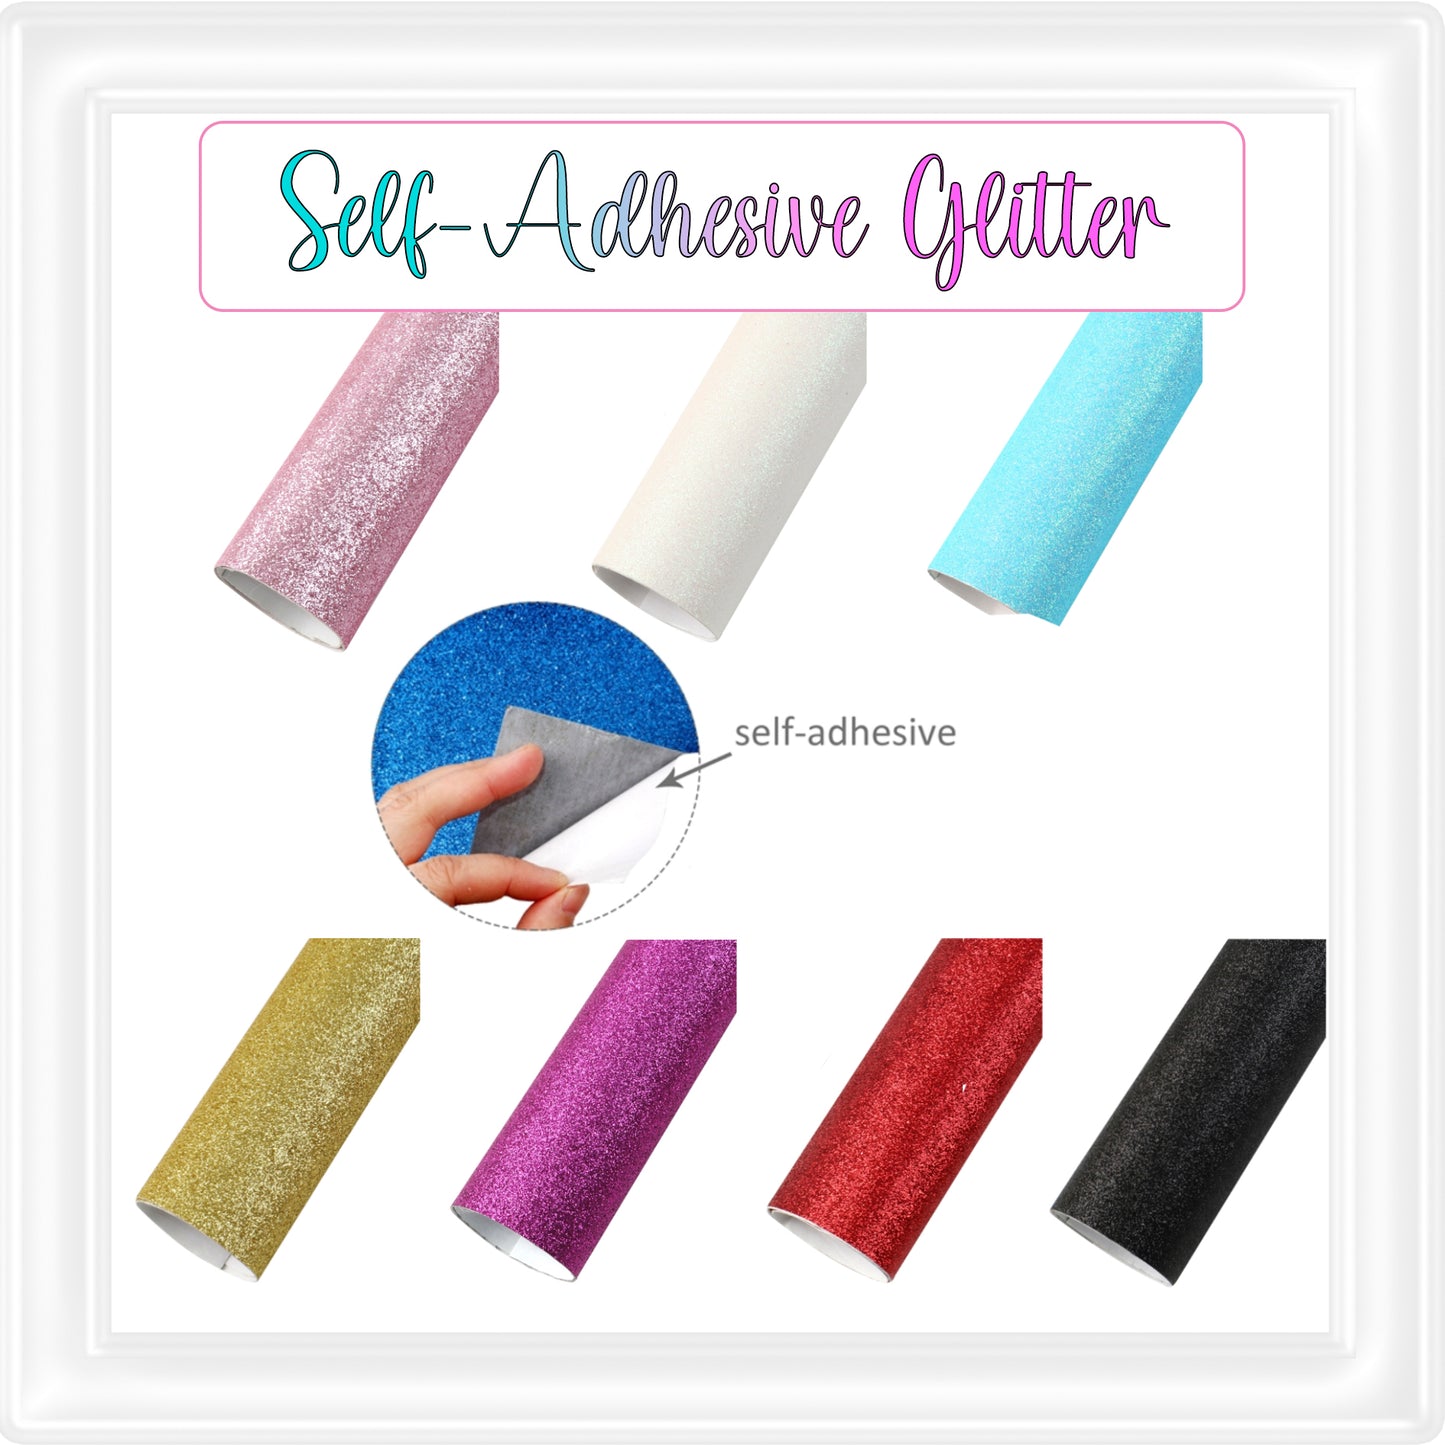 ⋅ Self-Adhesive Backed Fine Glitter ⋅ For Double-Sided Projects ⋅ GOLD ⋅